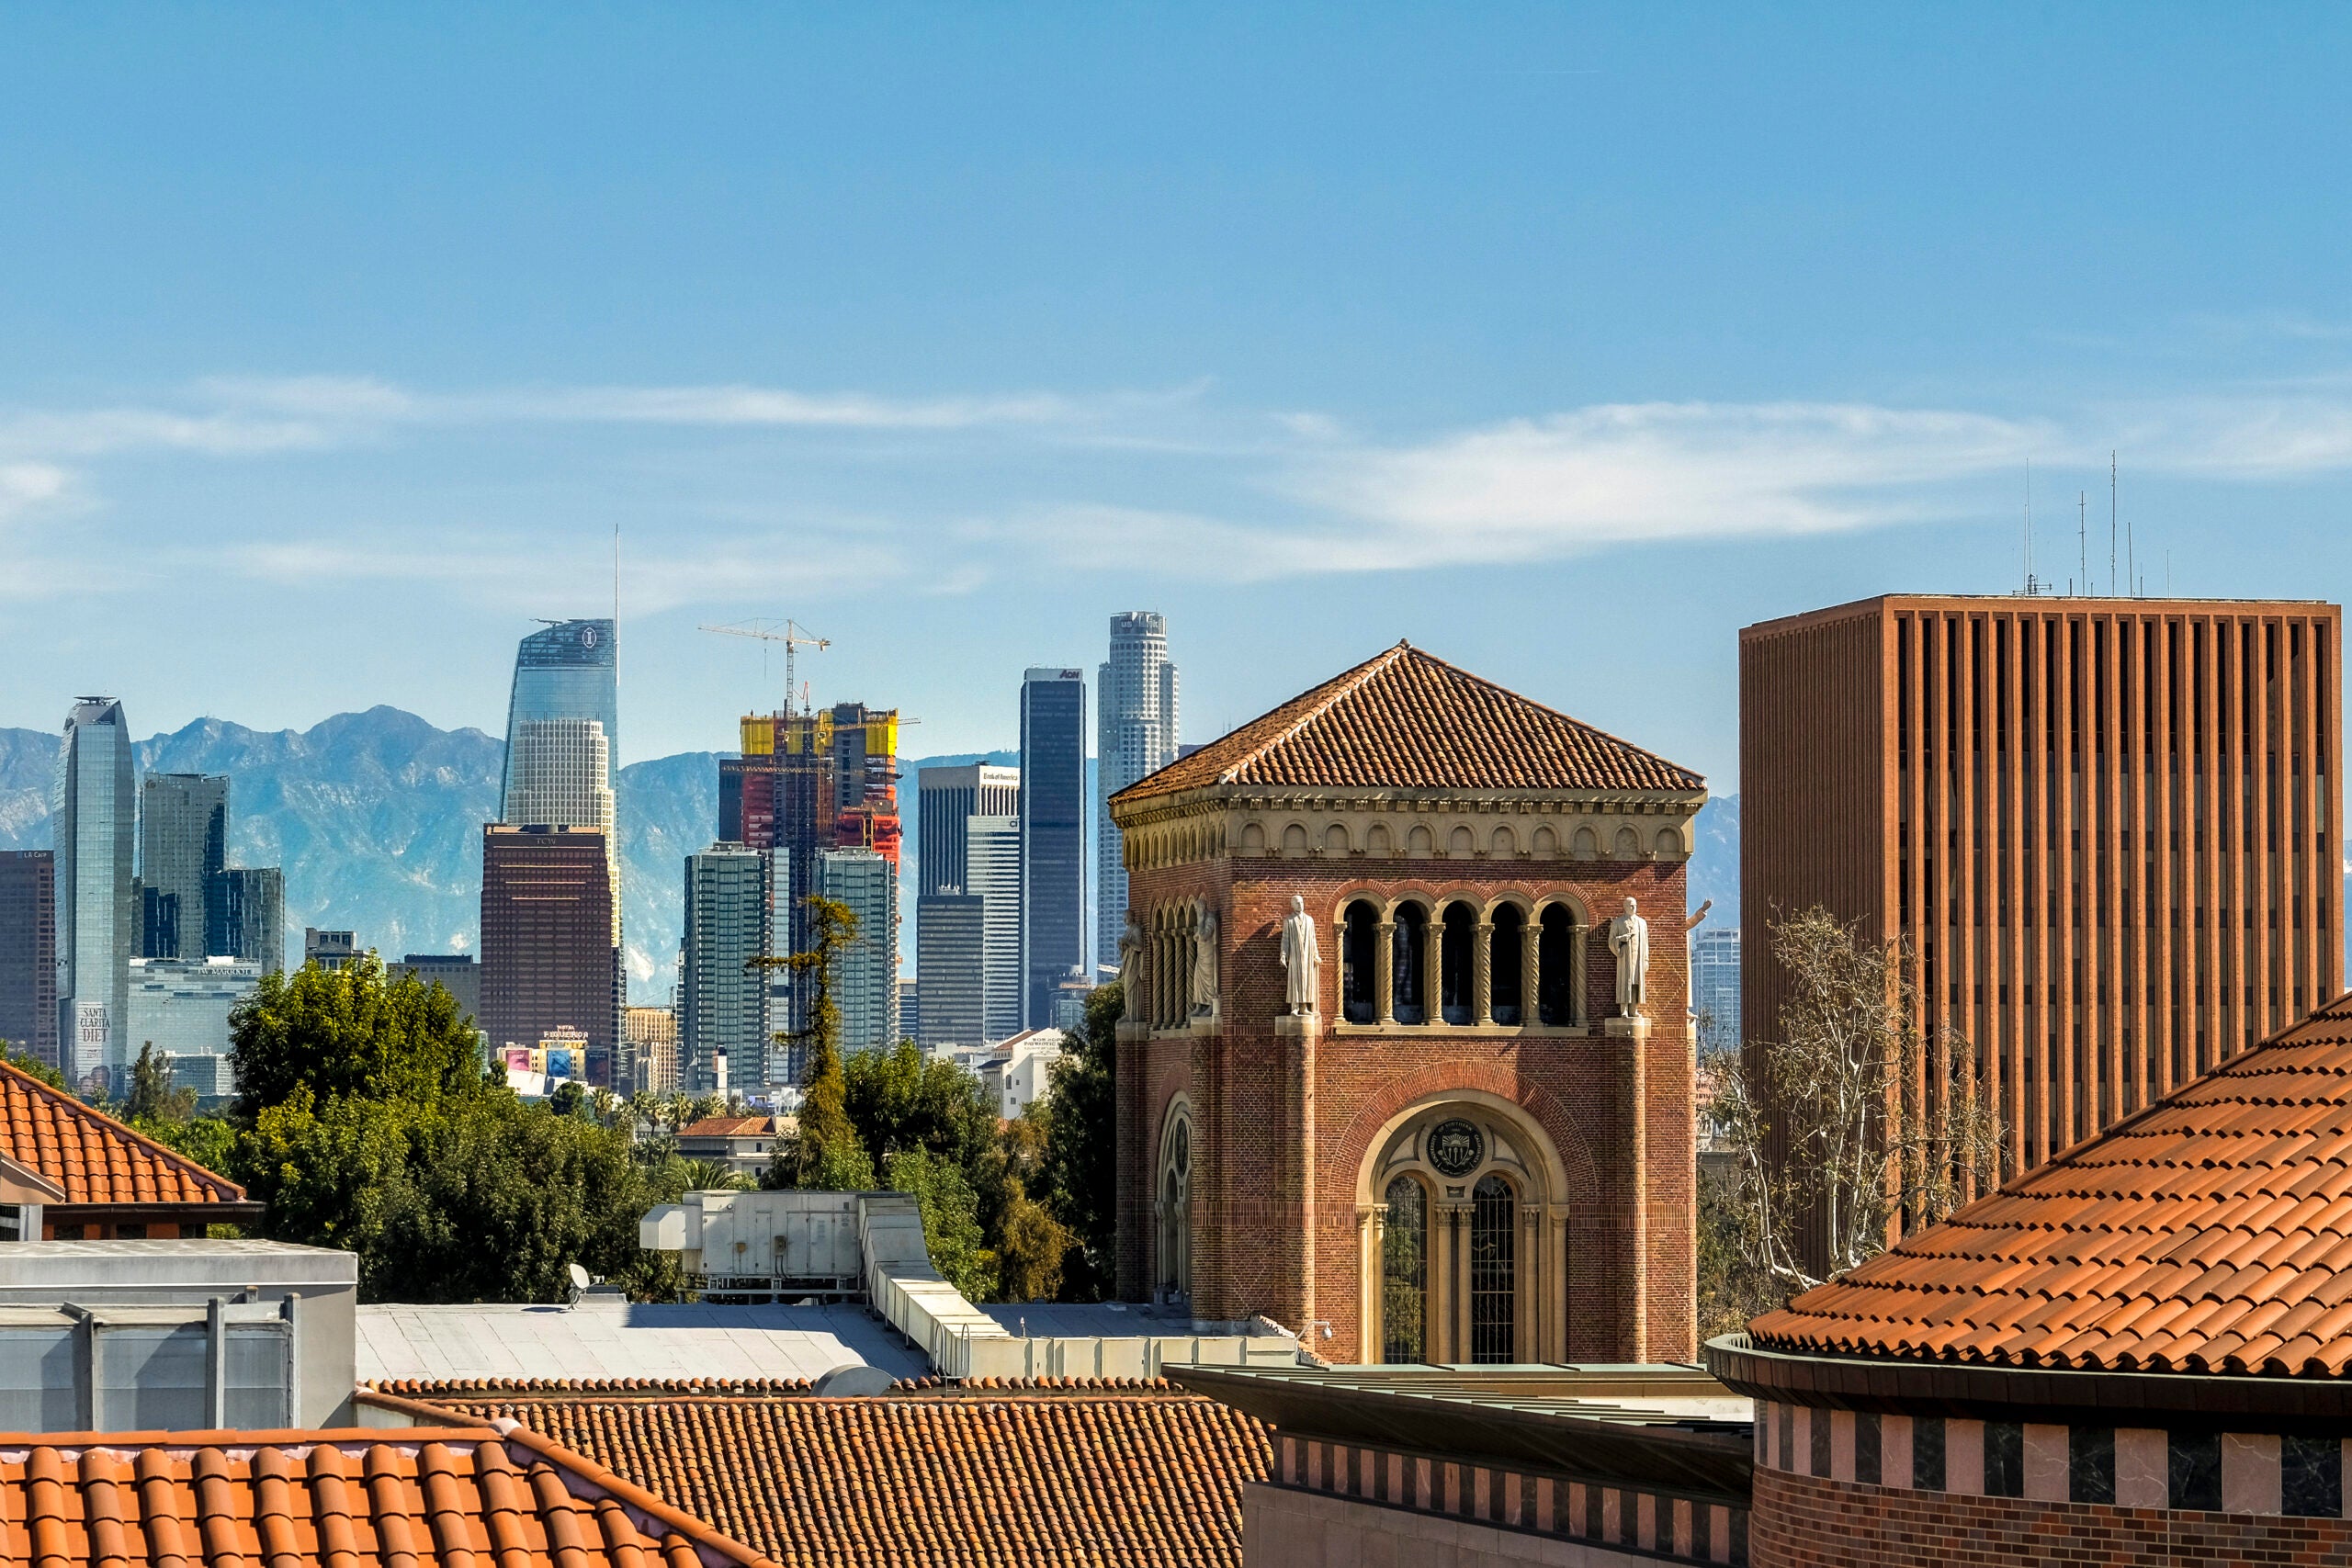 USC and Downtown Los Angeles scenic.